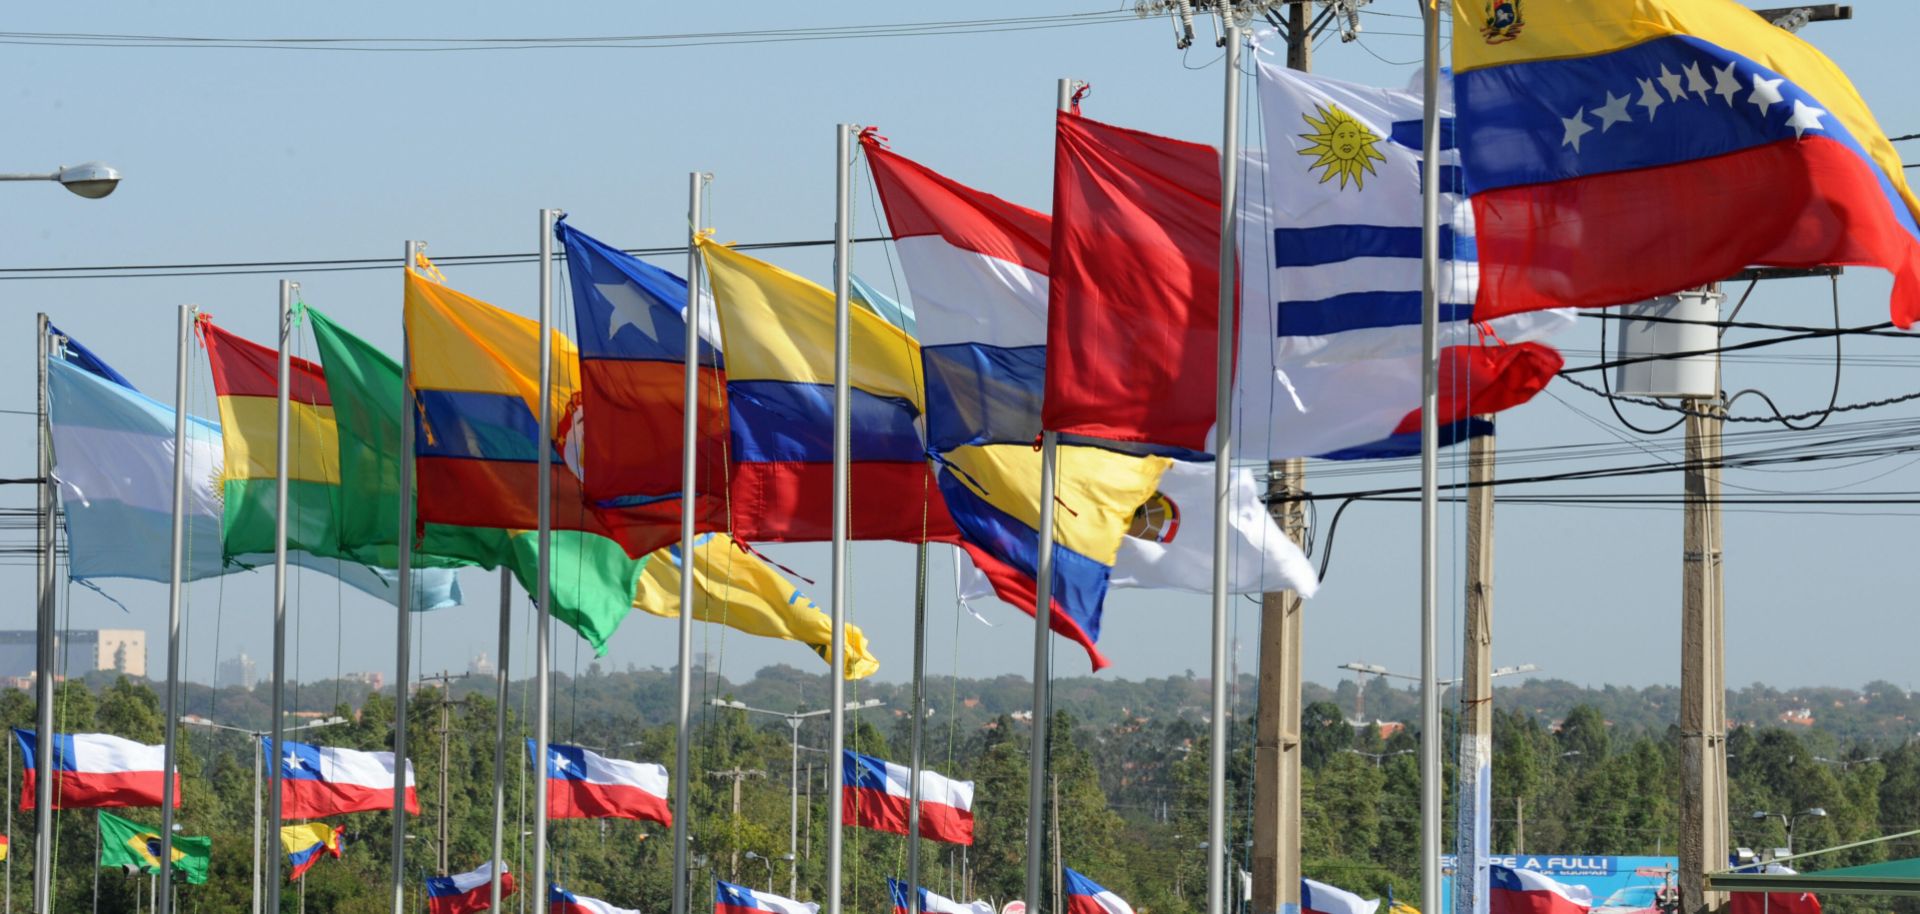 Flags of the countries that are full and associate members of Mercosur, the South American trade bloc. Political changes and recession in Argentina and Brazil have pushed the group to try to liberalize its trade policies.